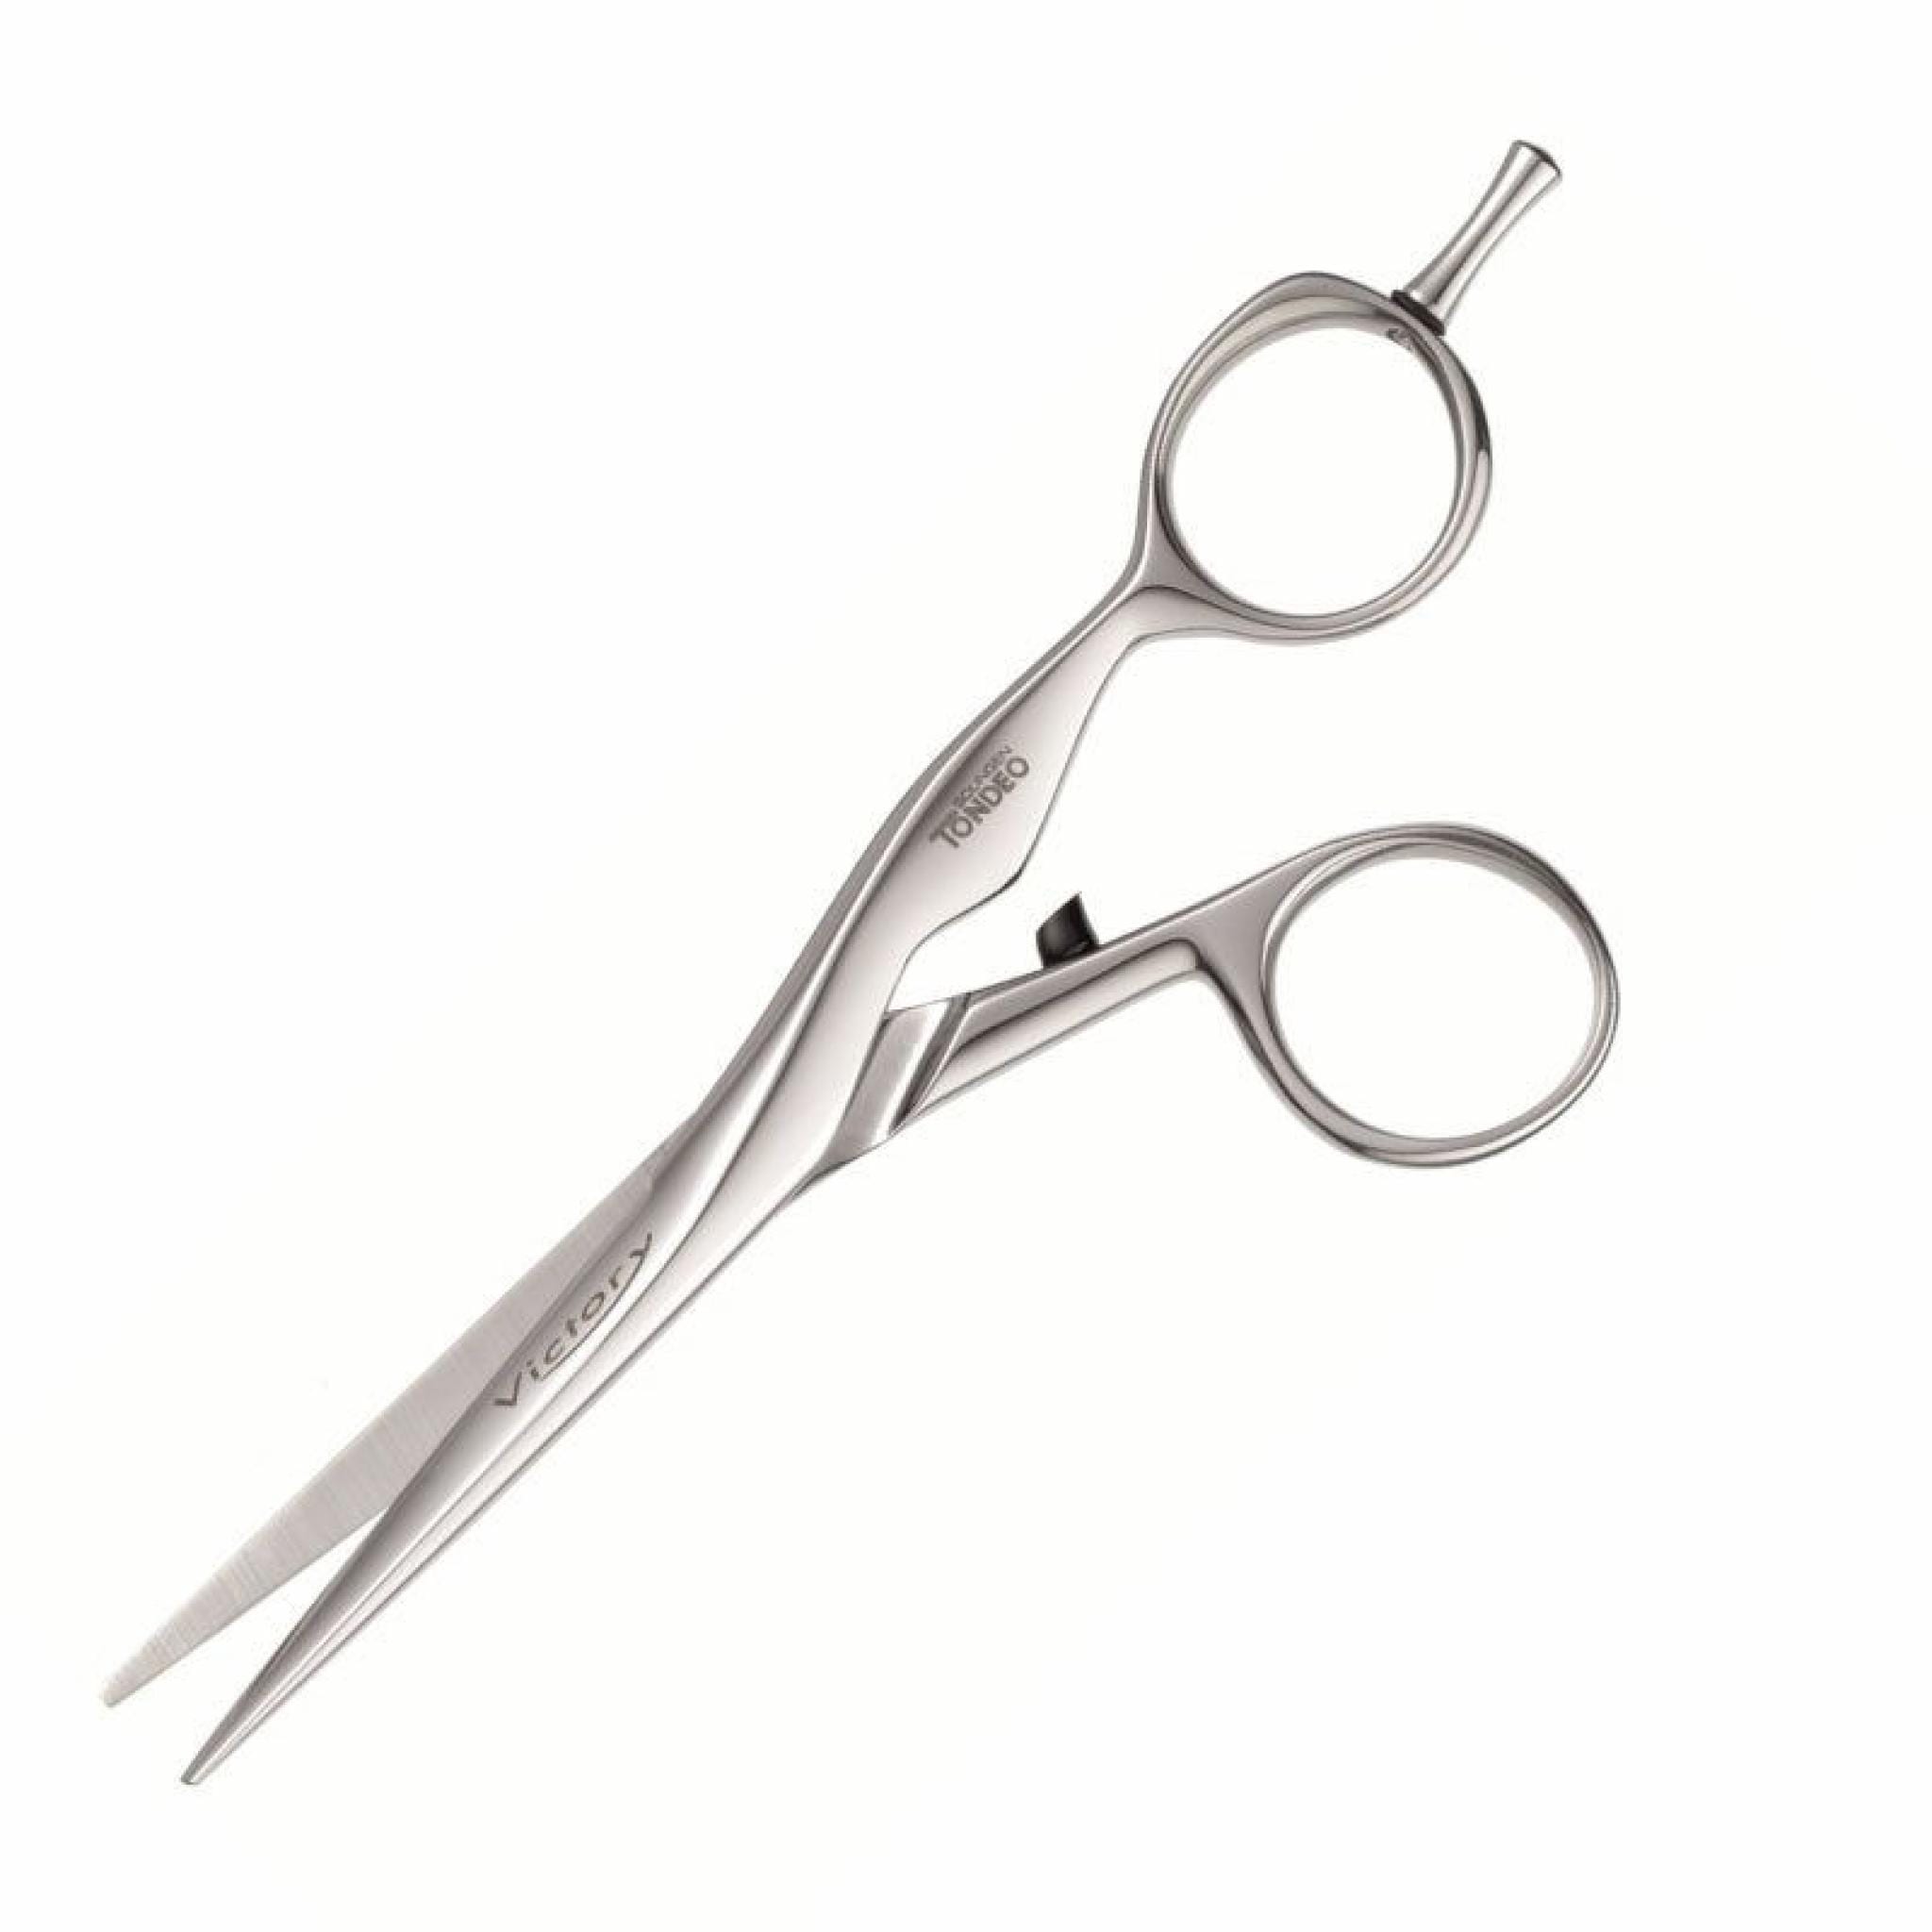 sponsored Every year Restate Tondeo Victory Hairdressing Scissor - Excellent Scissors